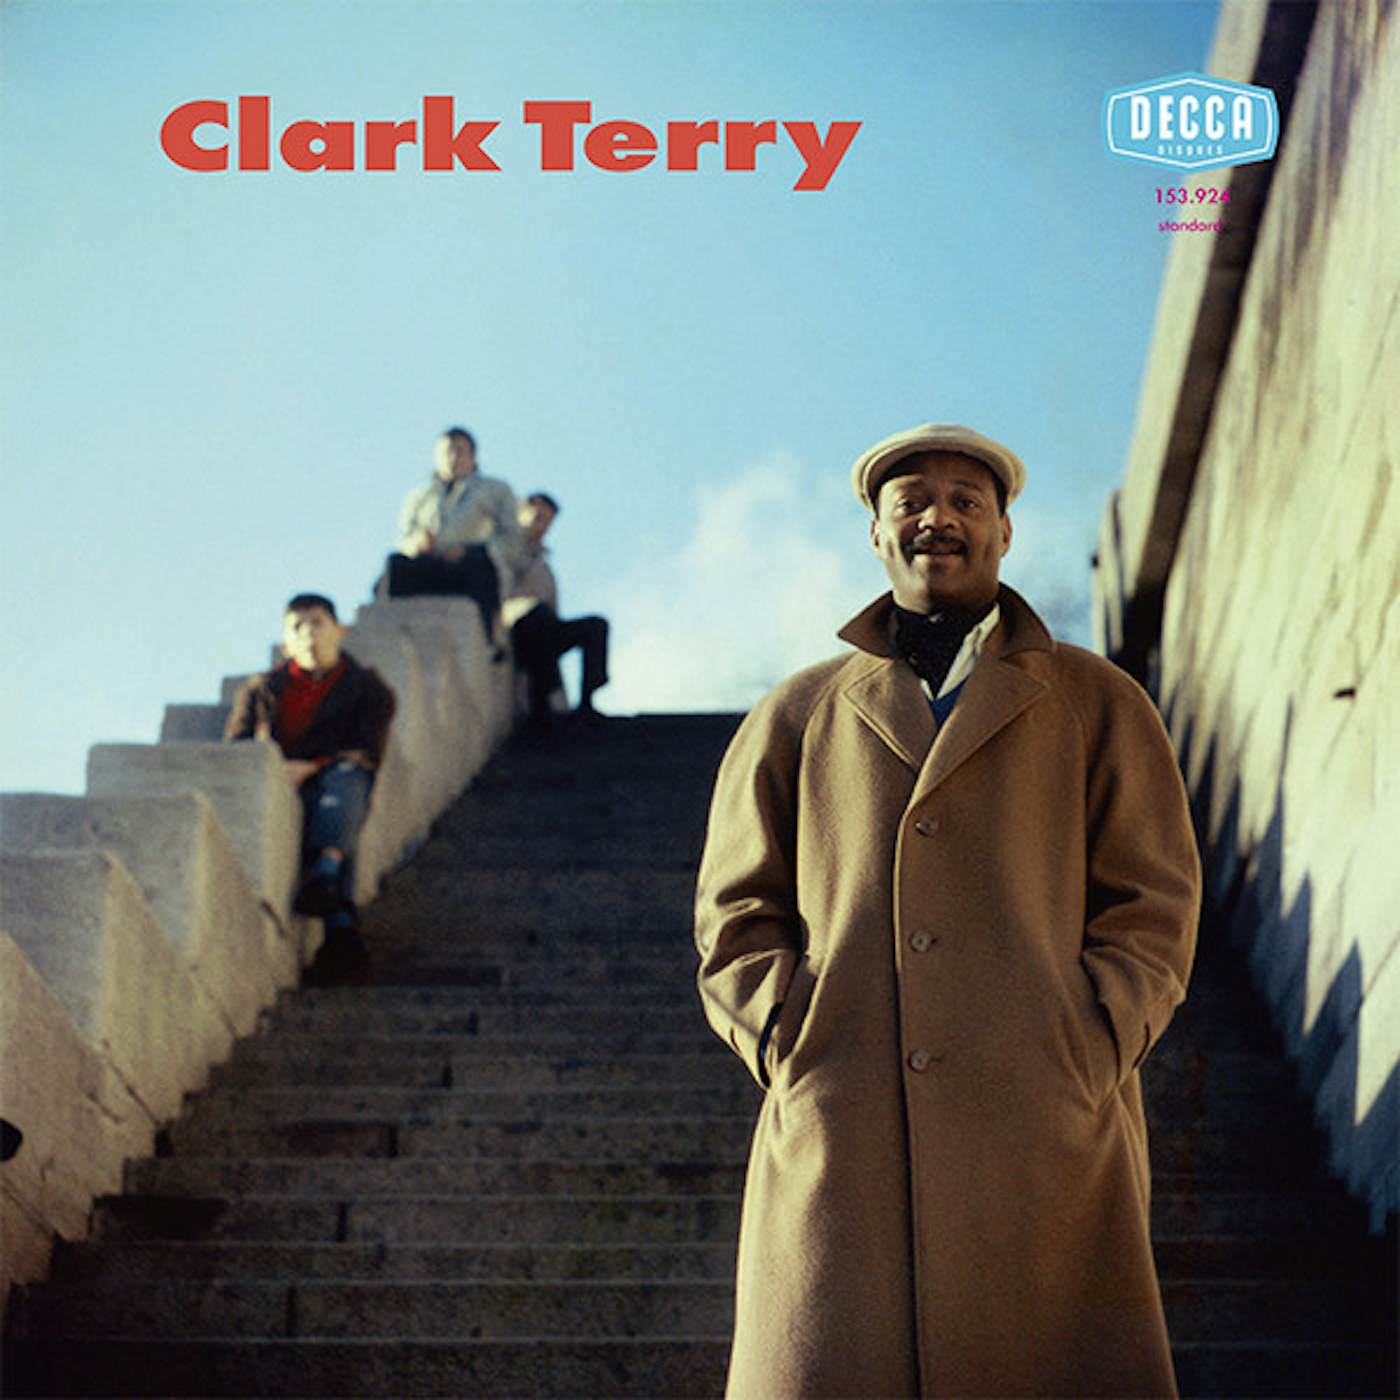 Clark Terry & Orchestra Featuring Paul Gonsalves Vinyl Record